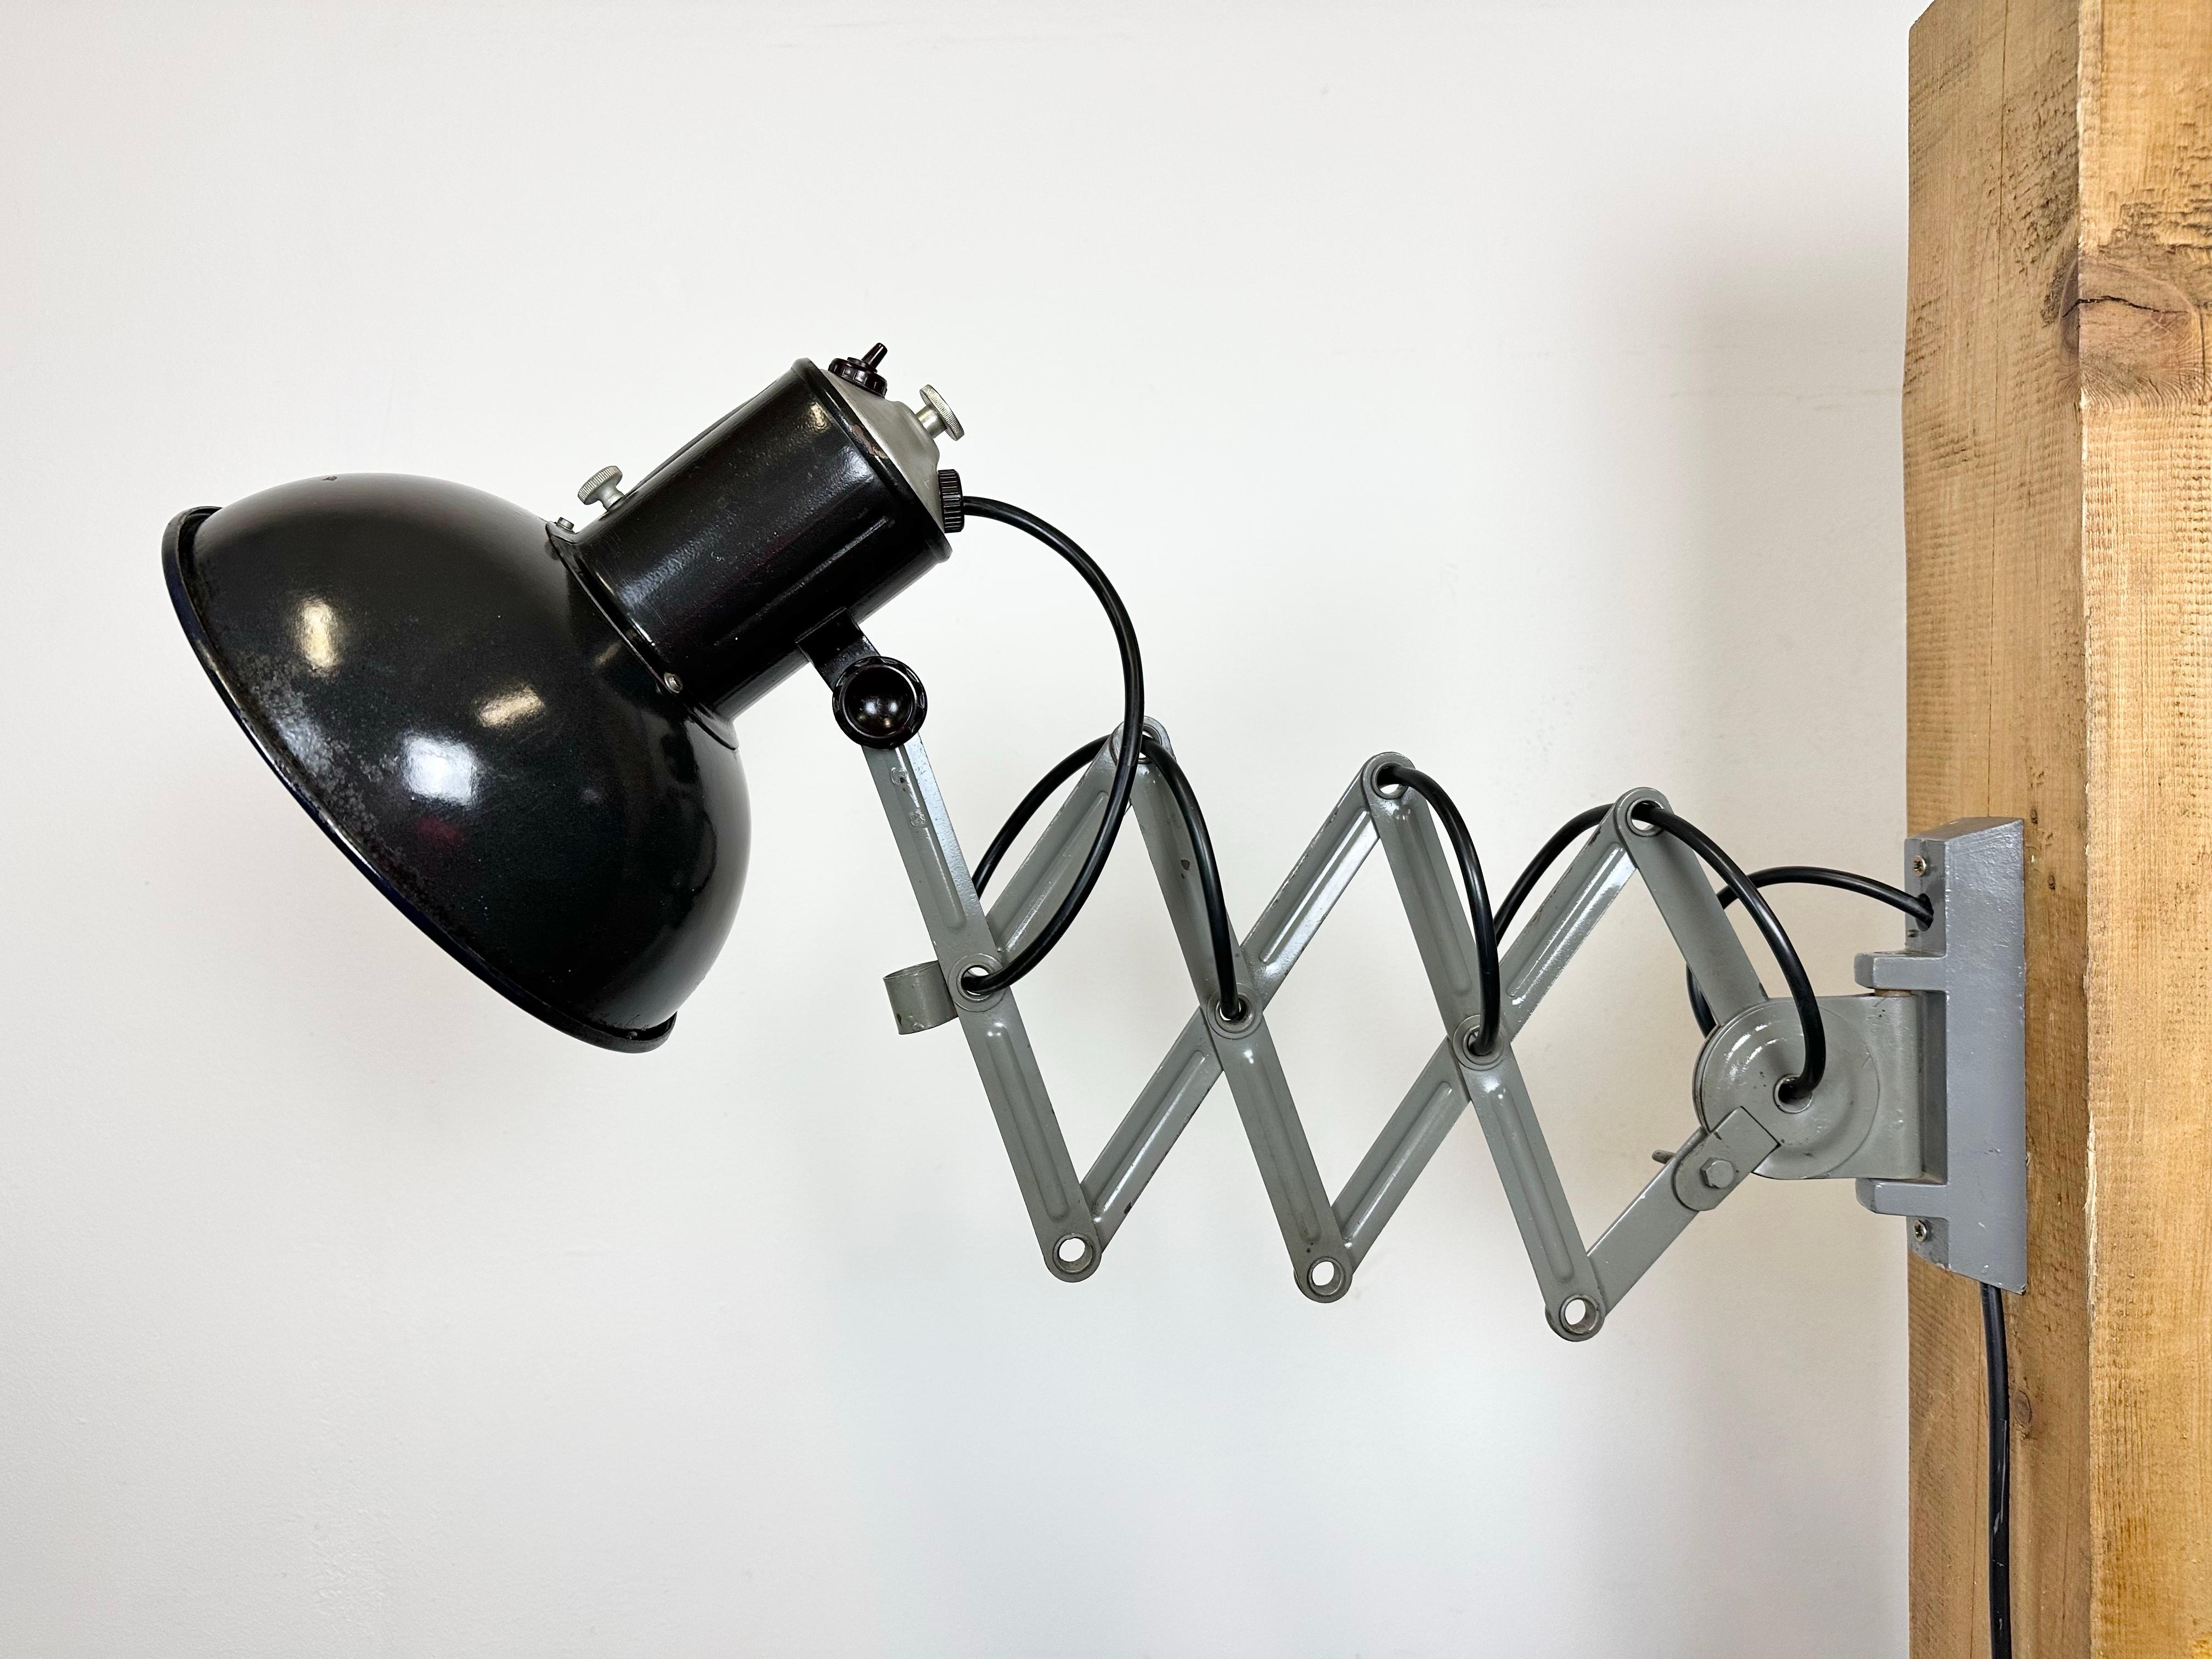 This vintage Industrial scissor lamp was produced in former Czechoslovakia during the 1950s. The lamp has a black enamel metal shade with white enamel interior. Grey iron scissor arm is extendable and can be turned sideways. Porcelain socket